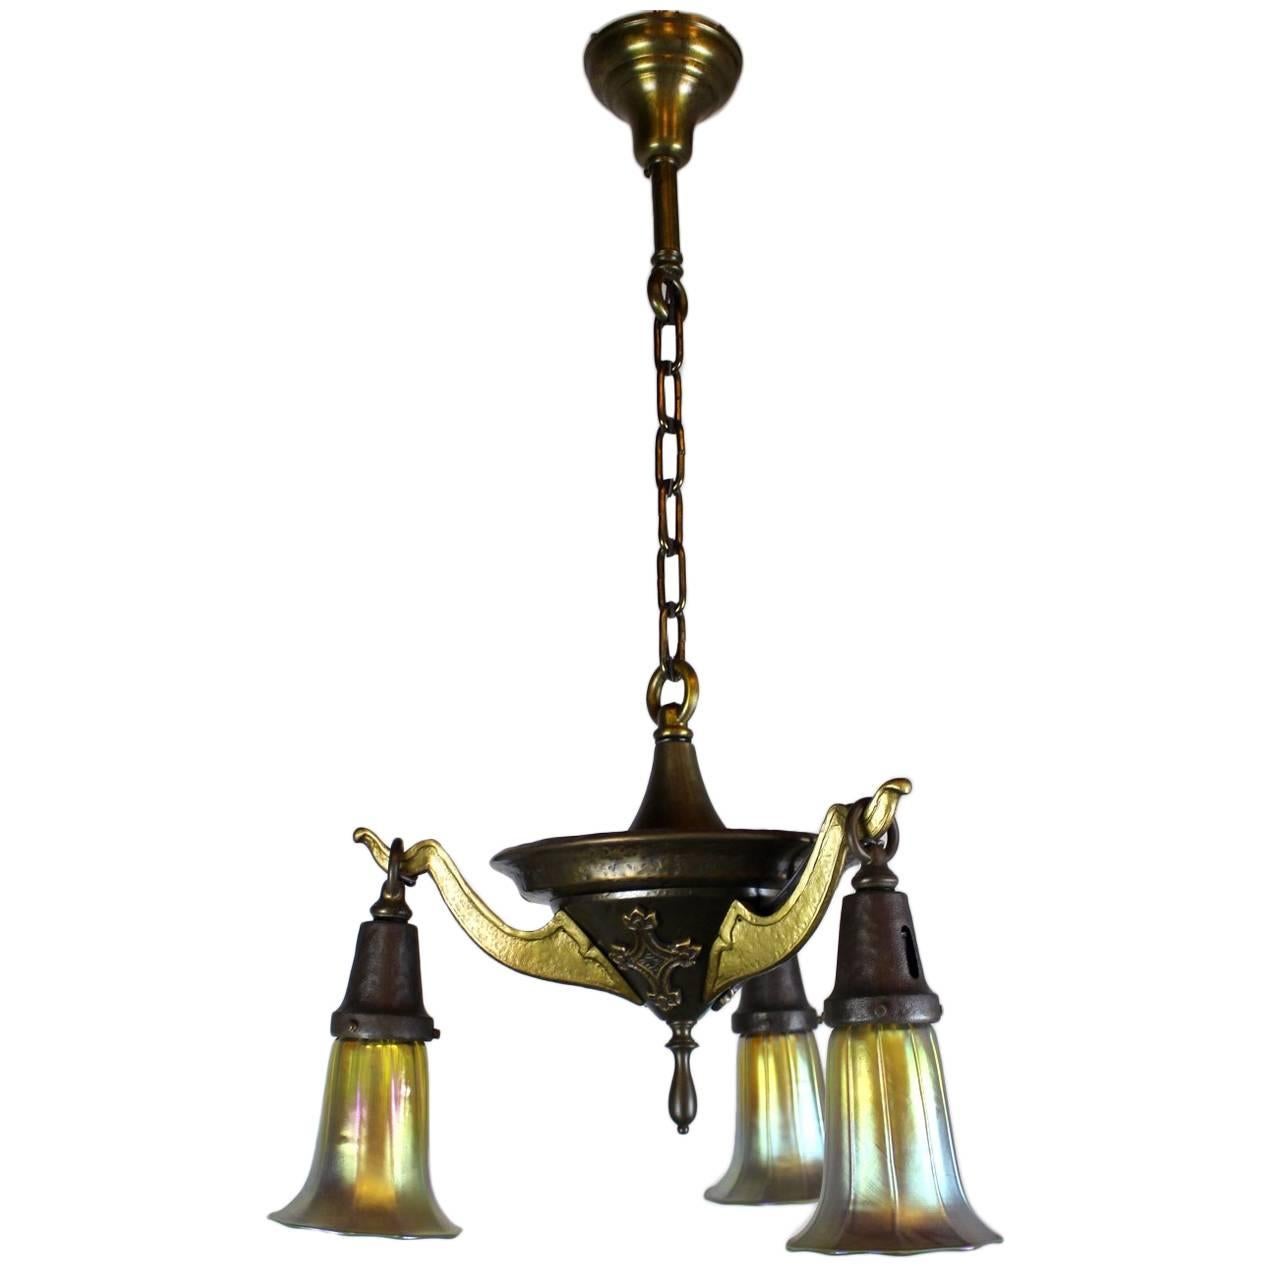 Three-Light Decorative Pan Fixture with Art Glass For Sale